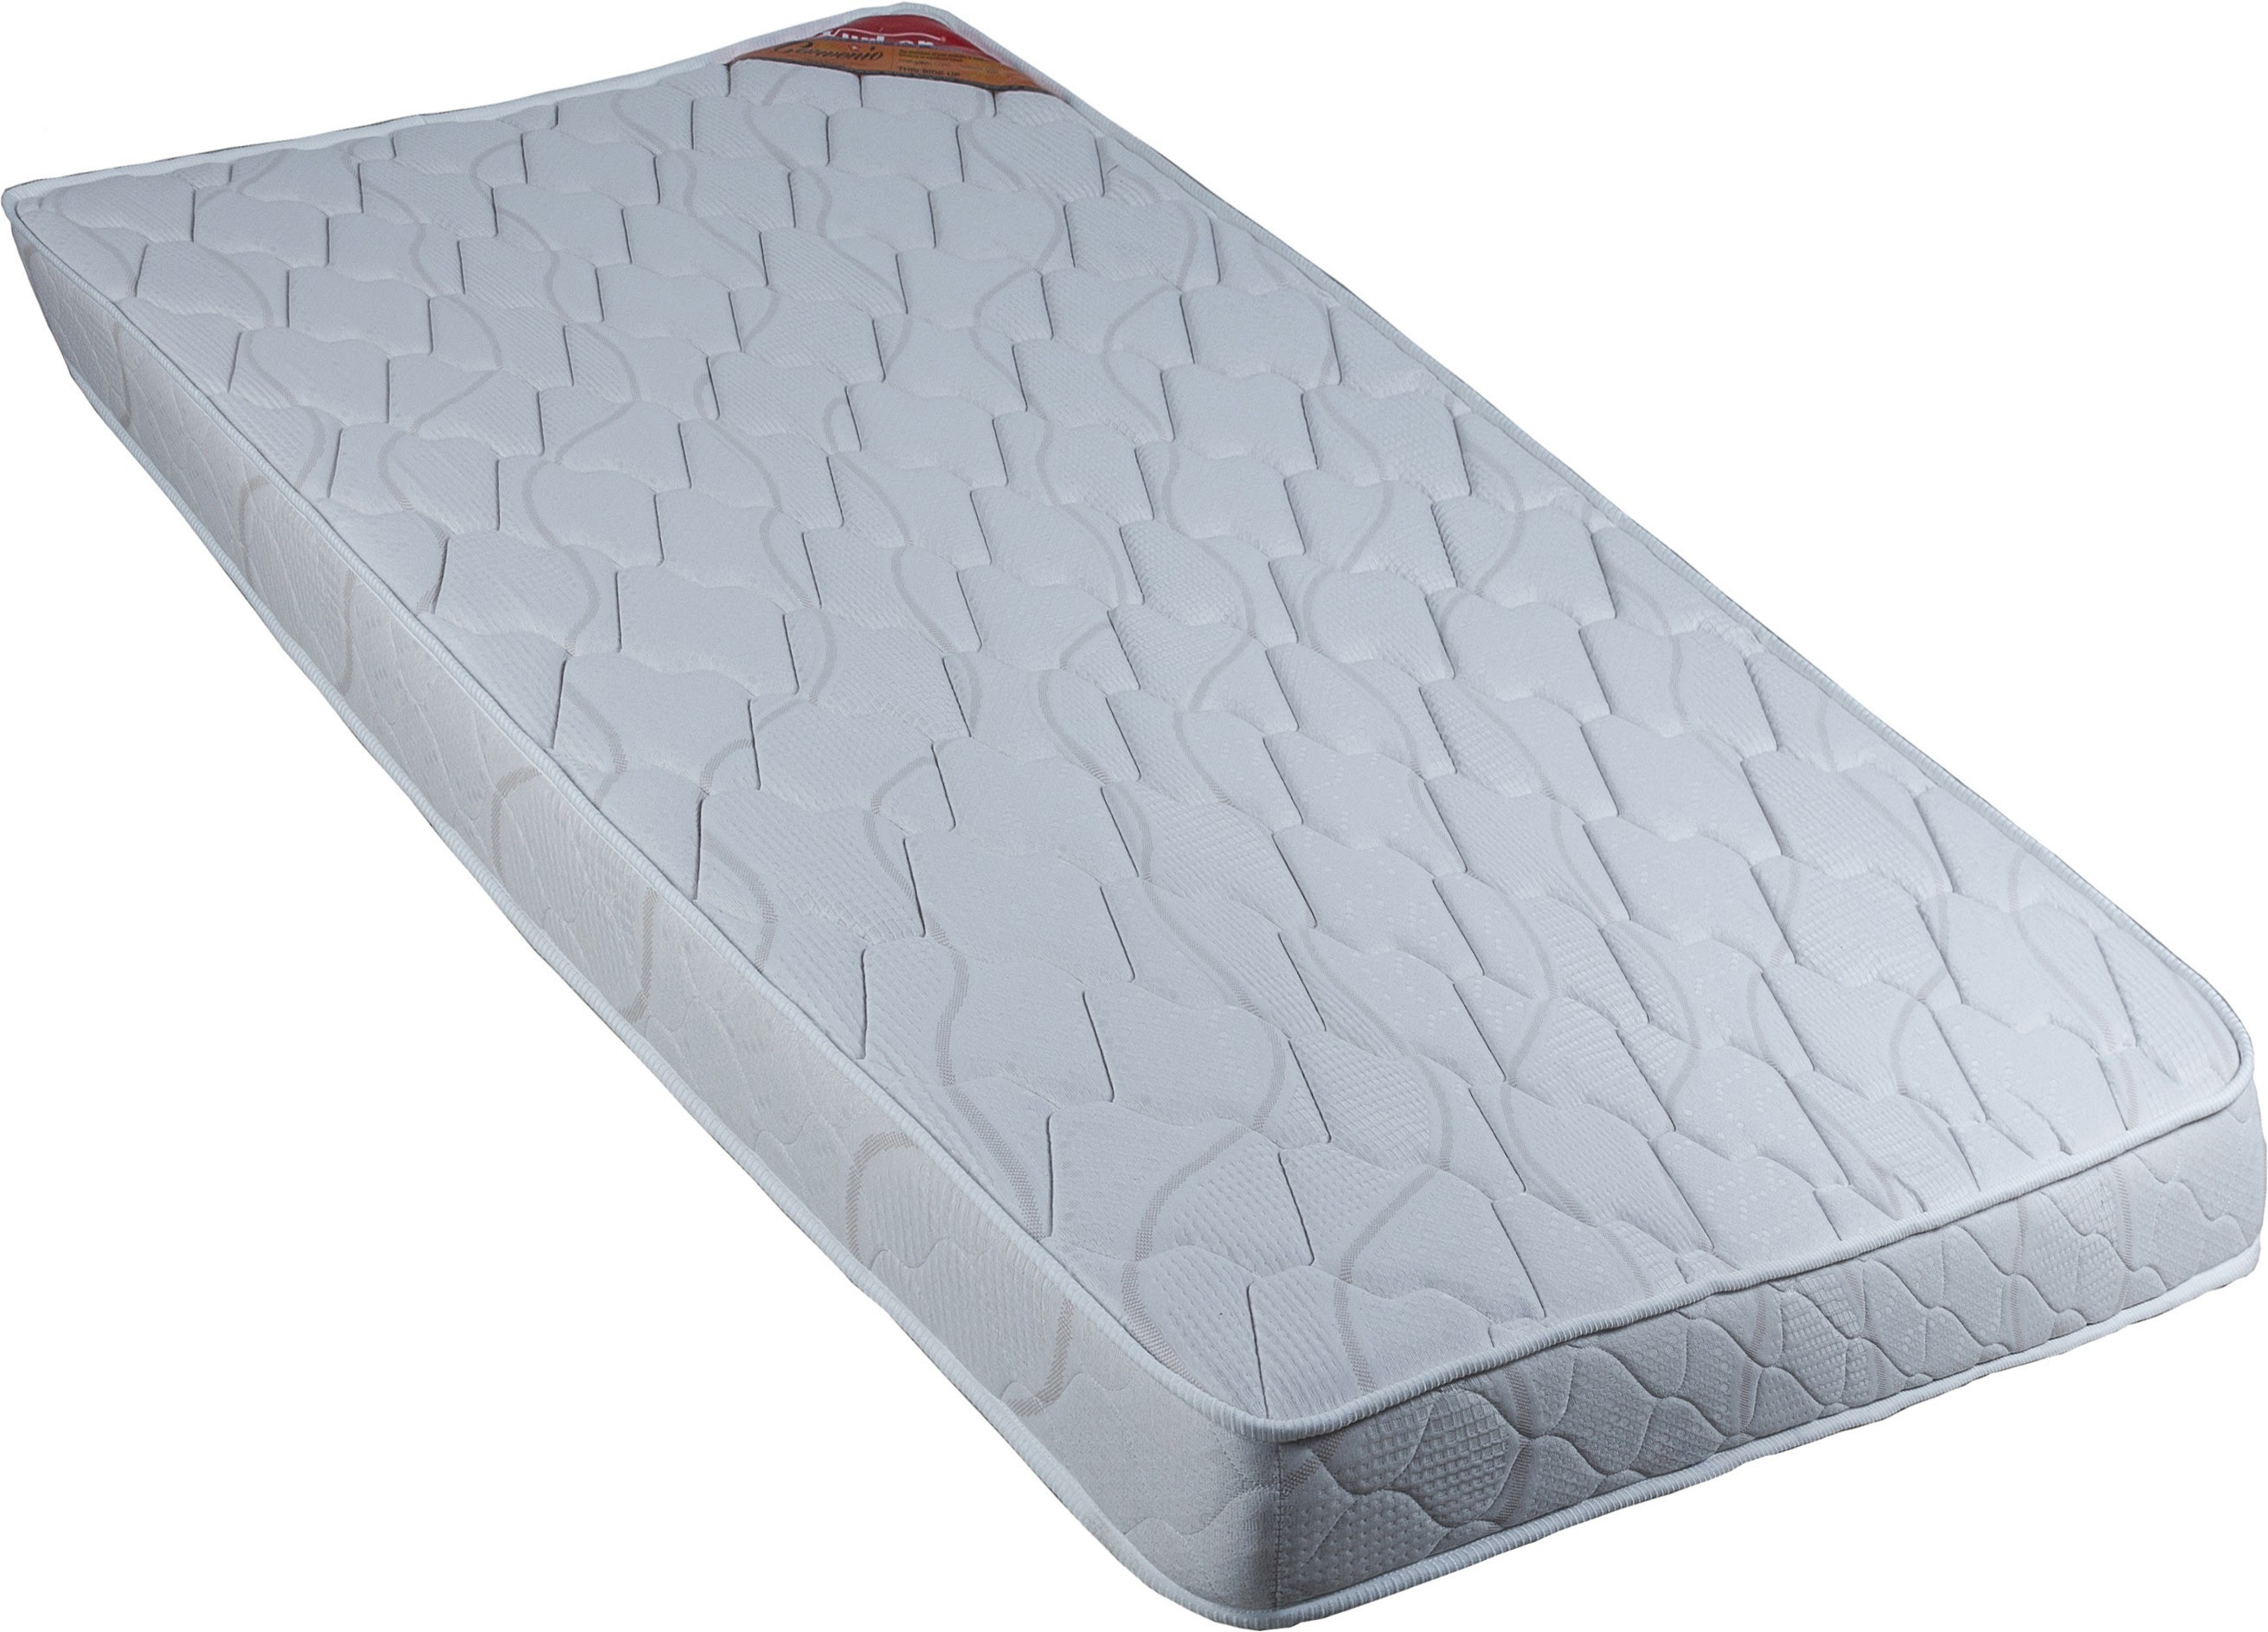 Reveal 64+ Impressive single bed mattress sale uk For Every Budget